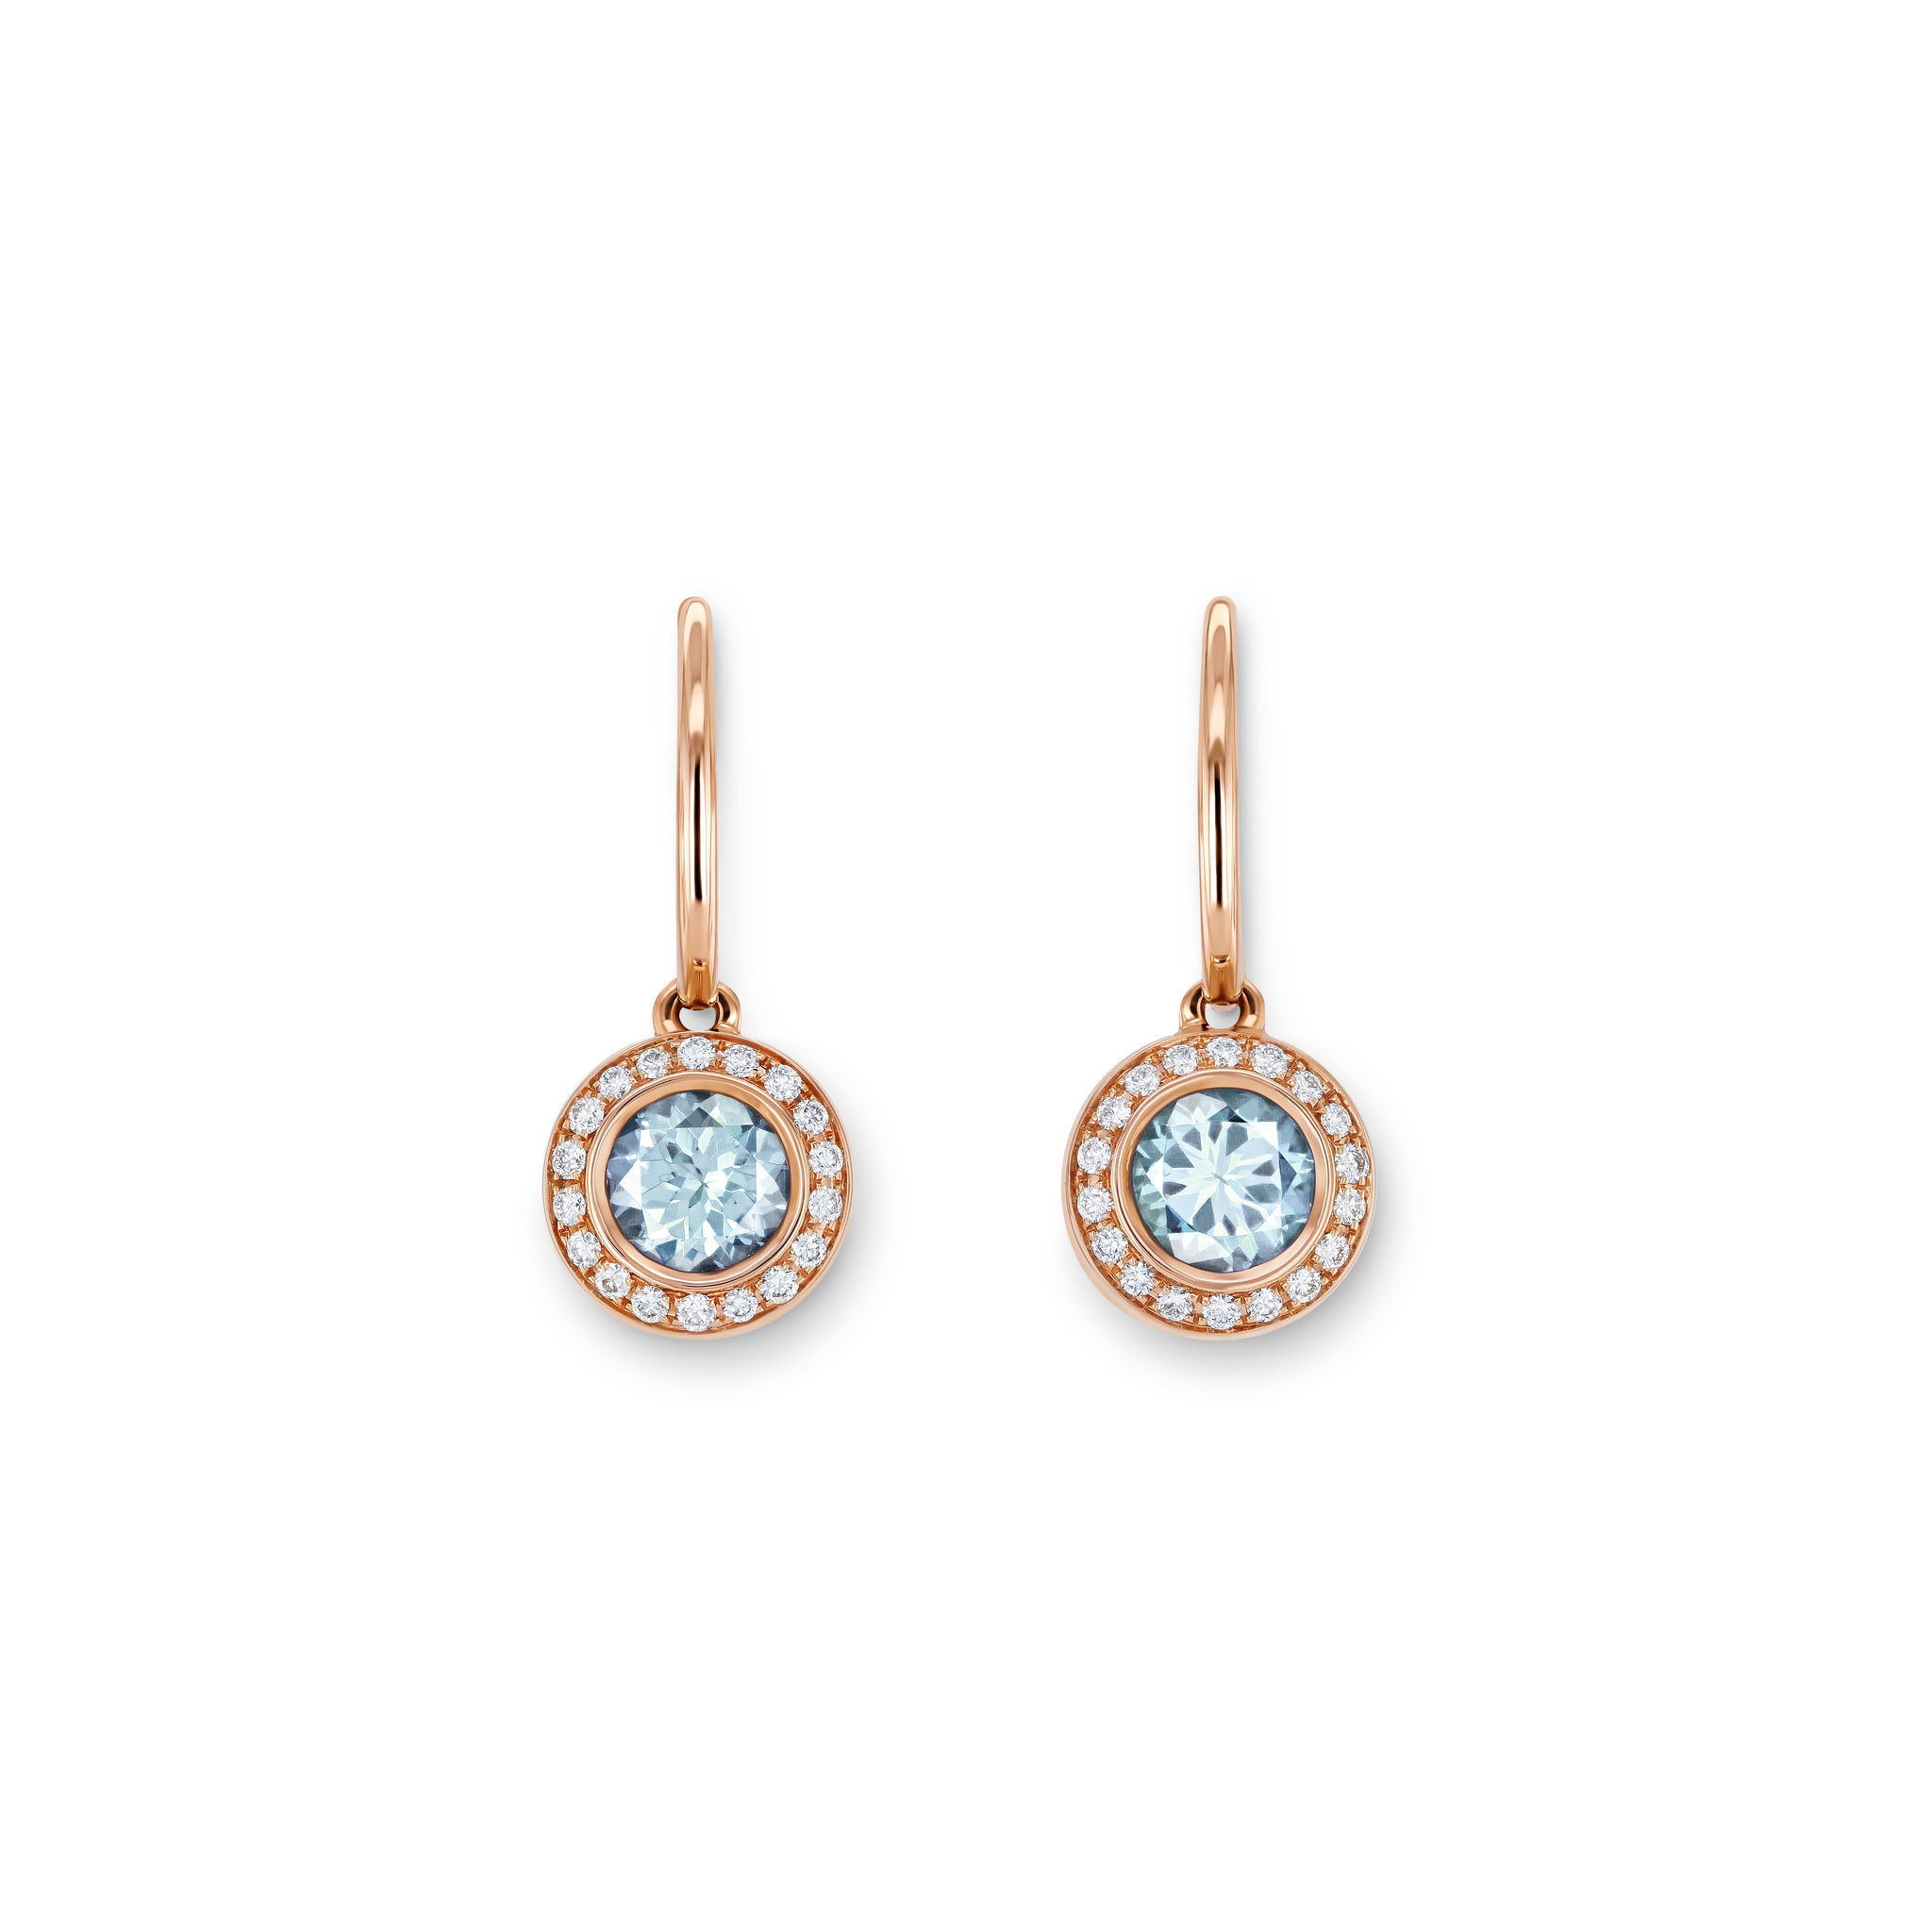 Earrings with aquamarines